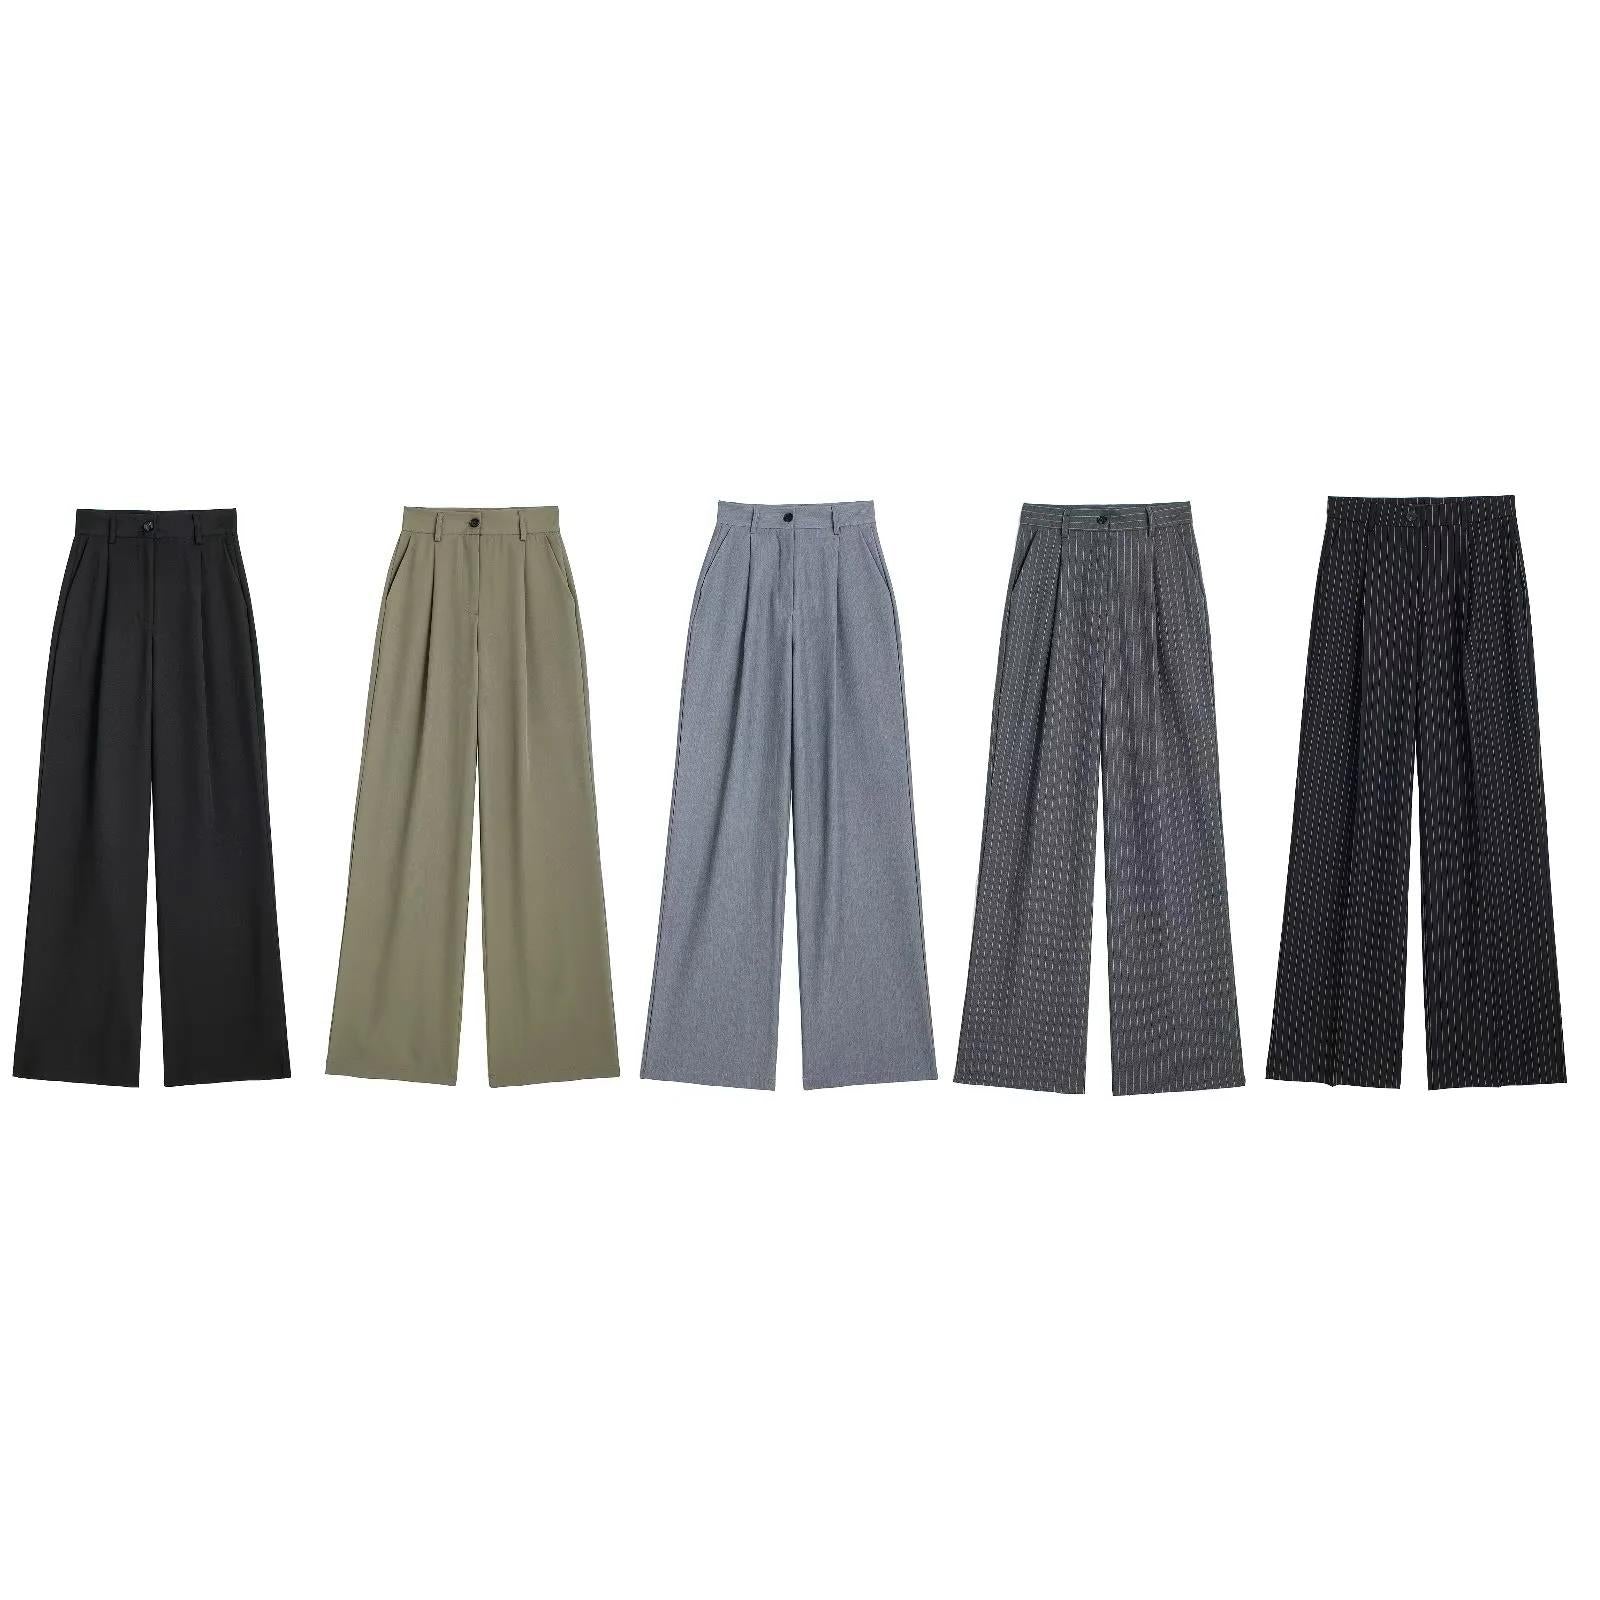 Retro Front Pleated High Waist Pants Casual Pants